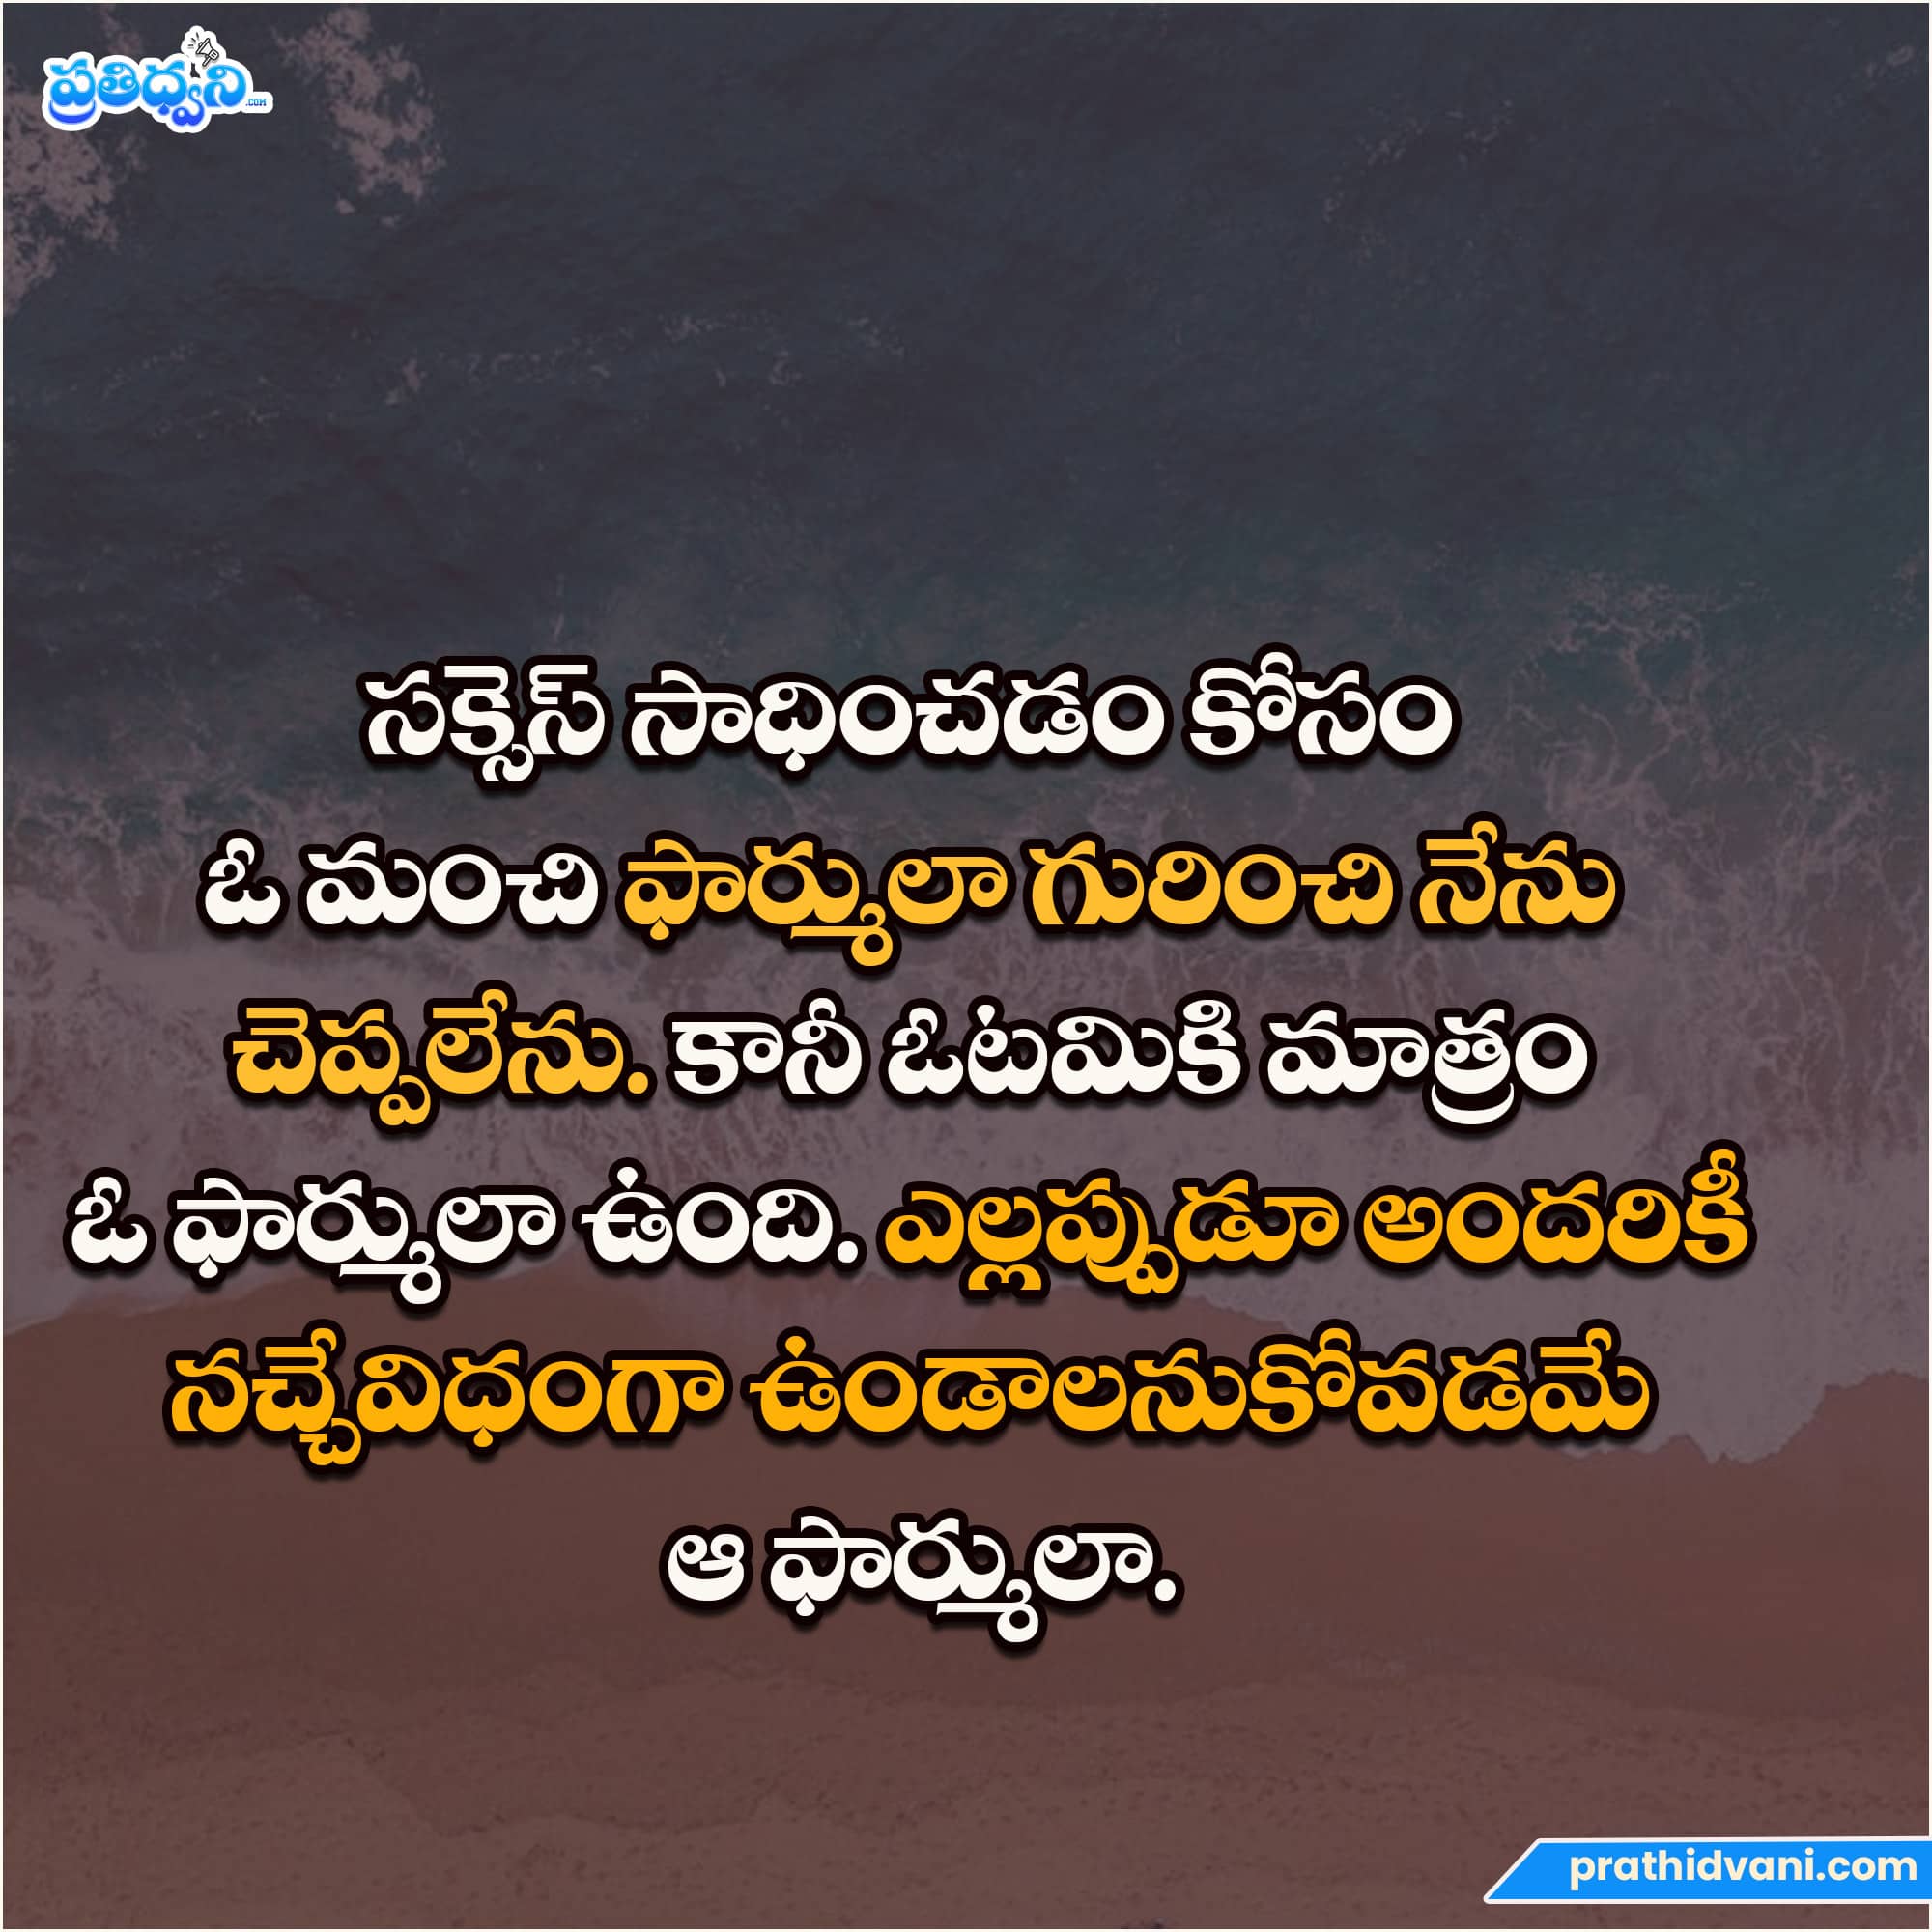 Latest Telugu Quotes and Quotations in Telugu Text 